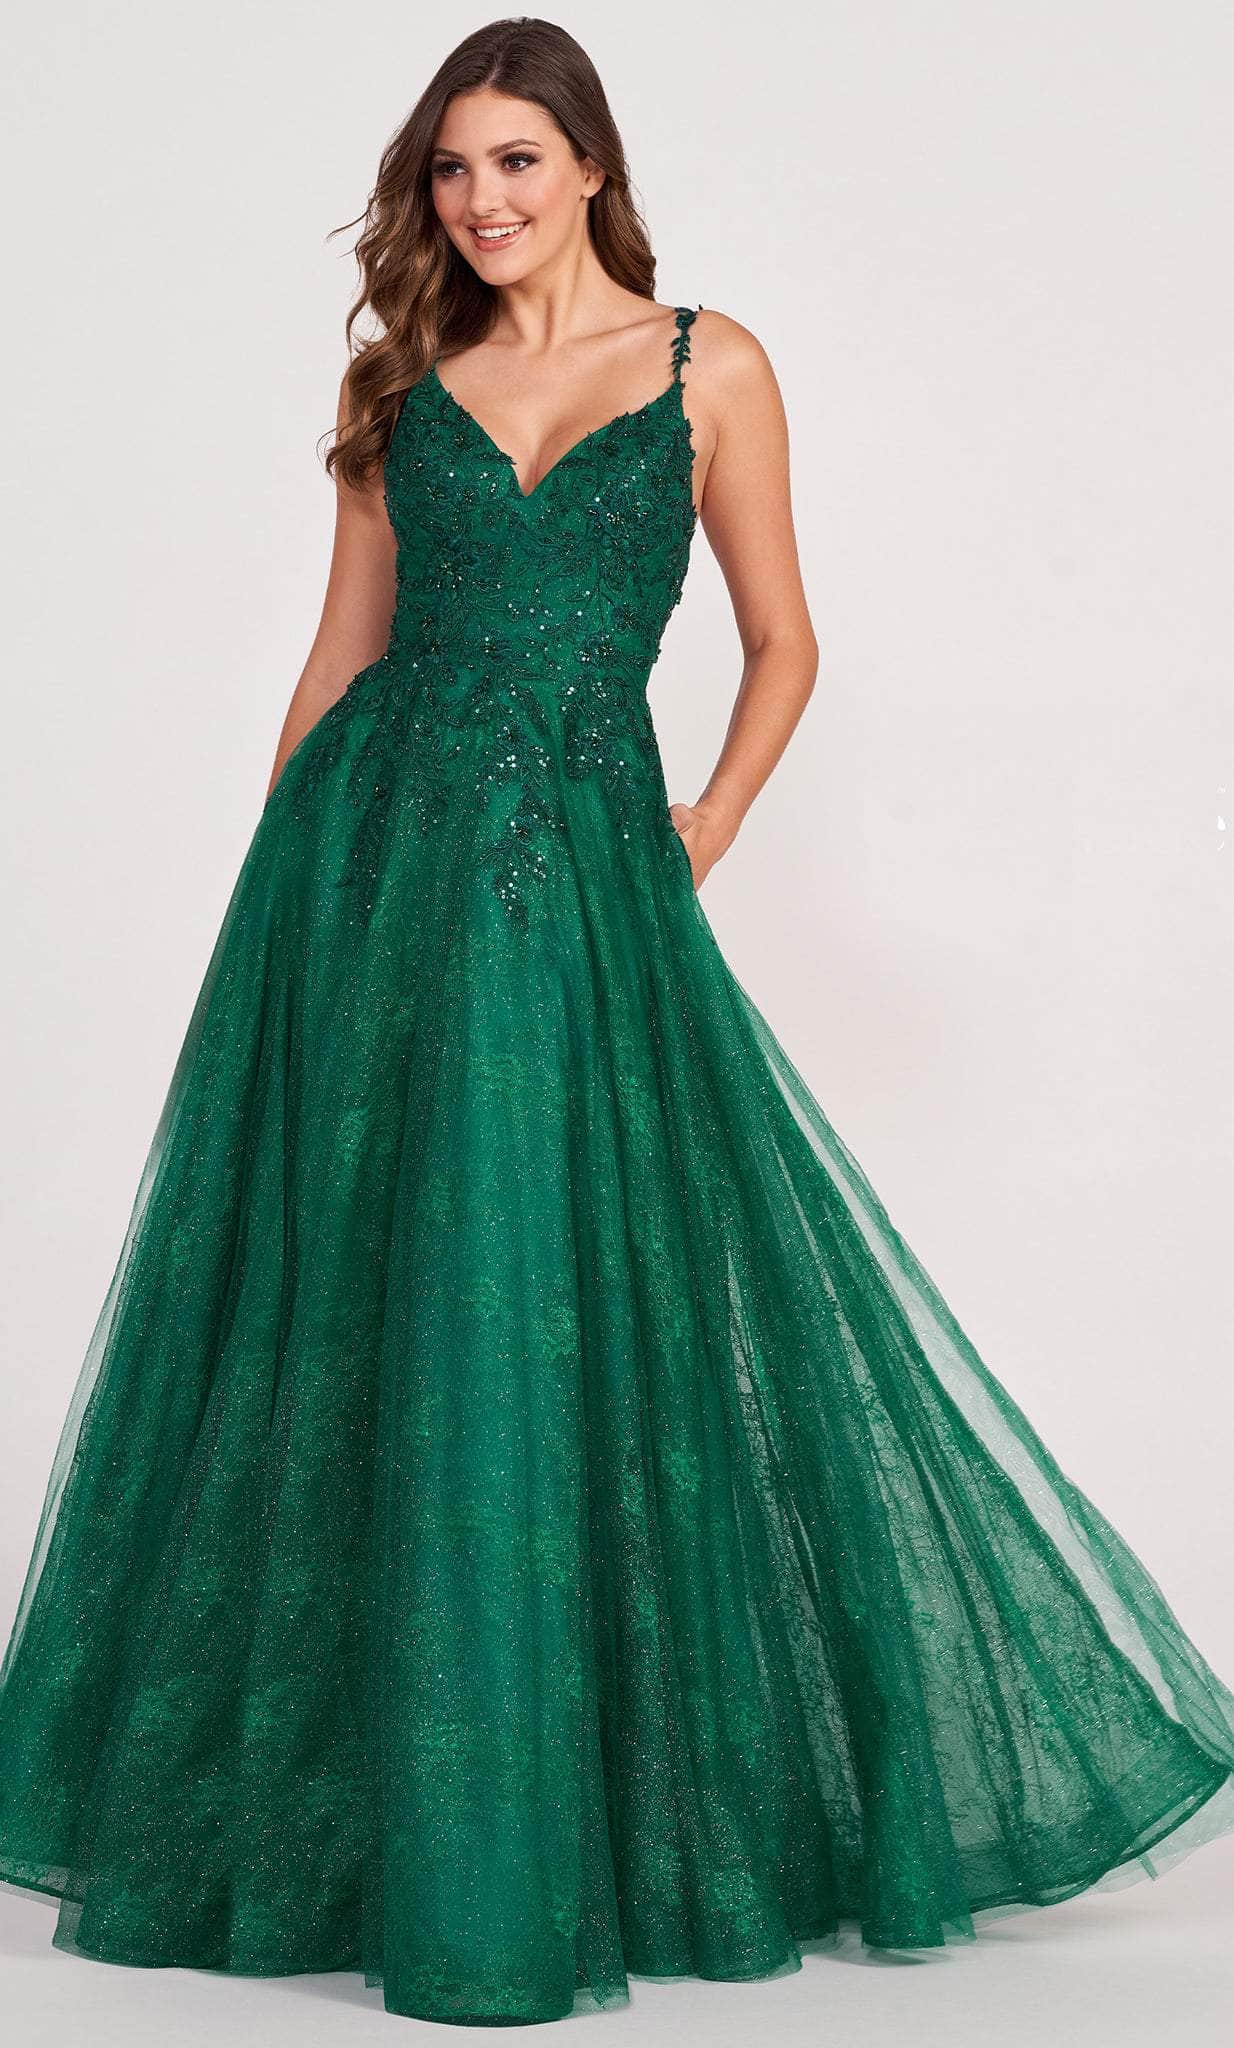 Image of Ellie Wilde EW34086 - Deep V-Neck Lace Prom Gown